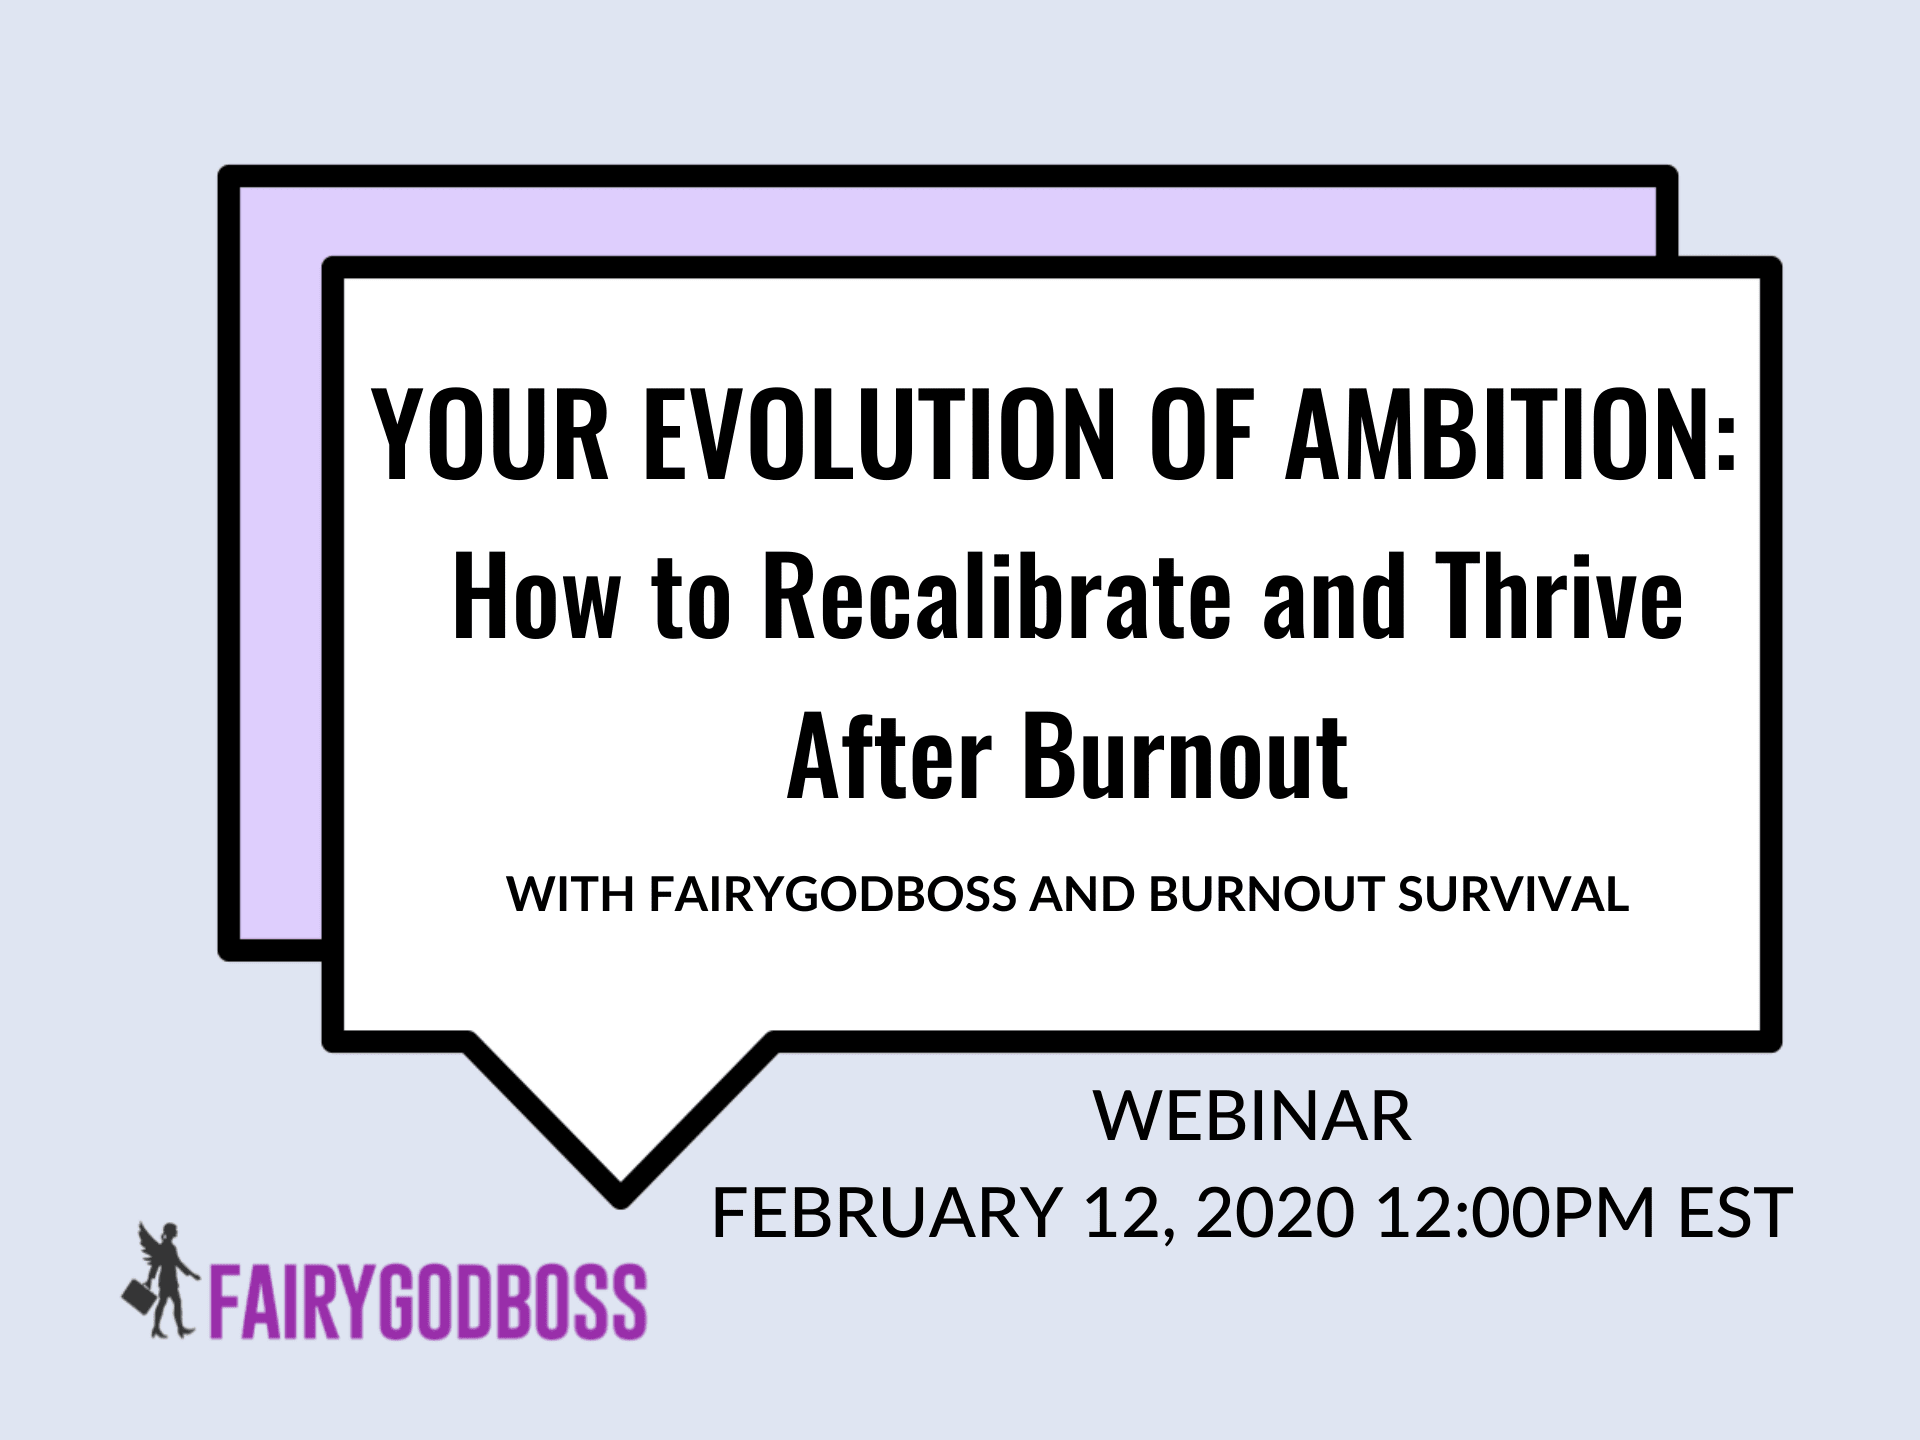 Your Evolution of Ambition: How to Recalibrate and Thrive After Burnout